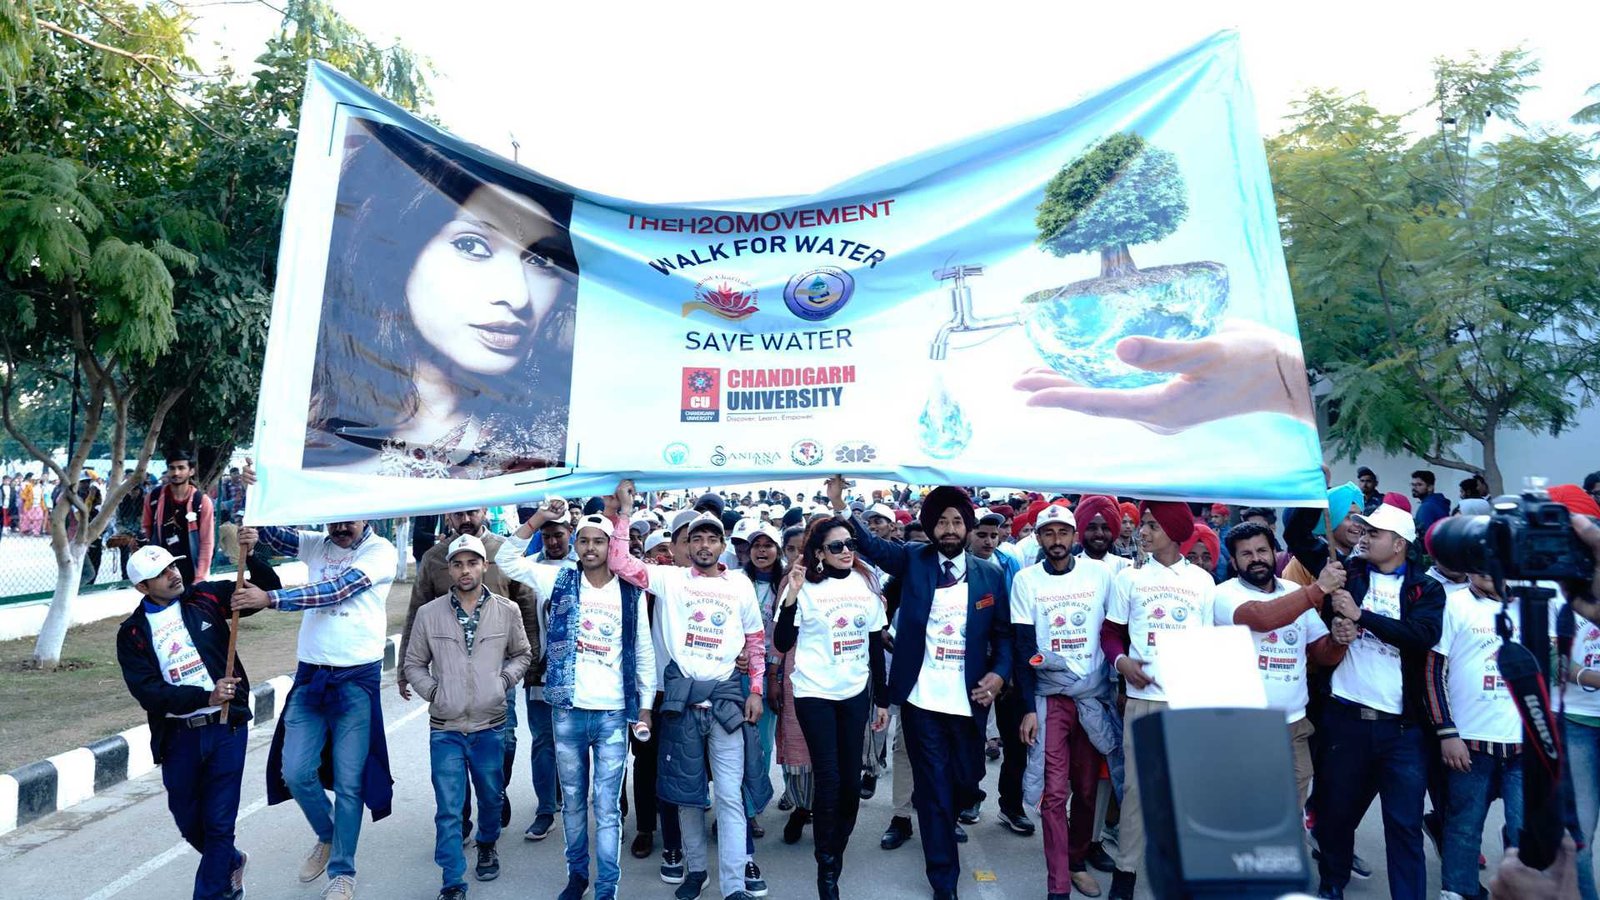 Walk for water and H2Omovement with Chandigarh University